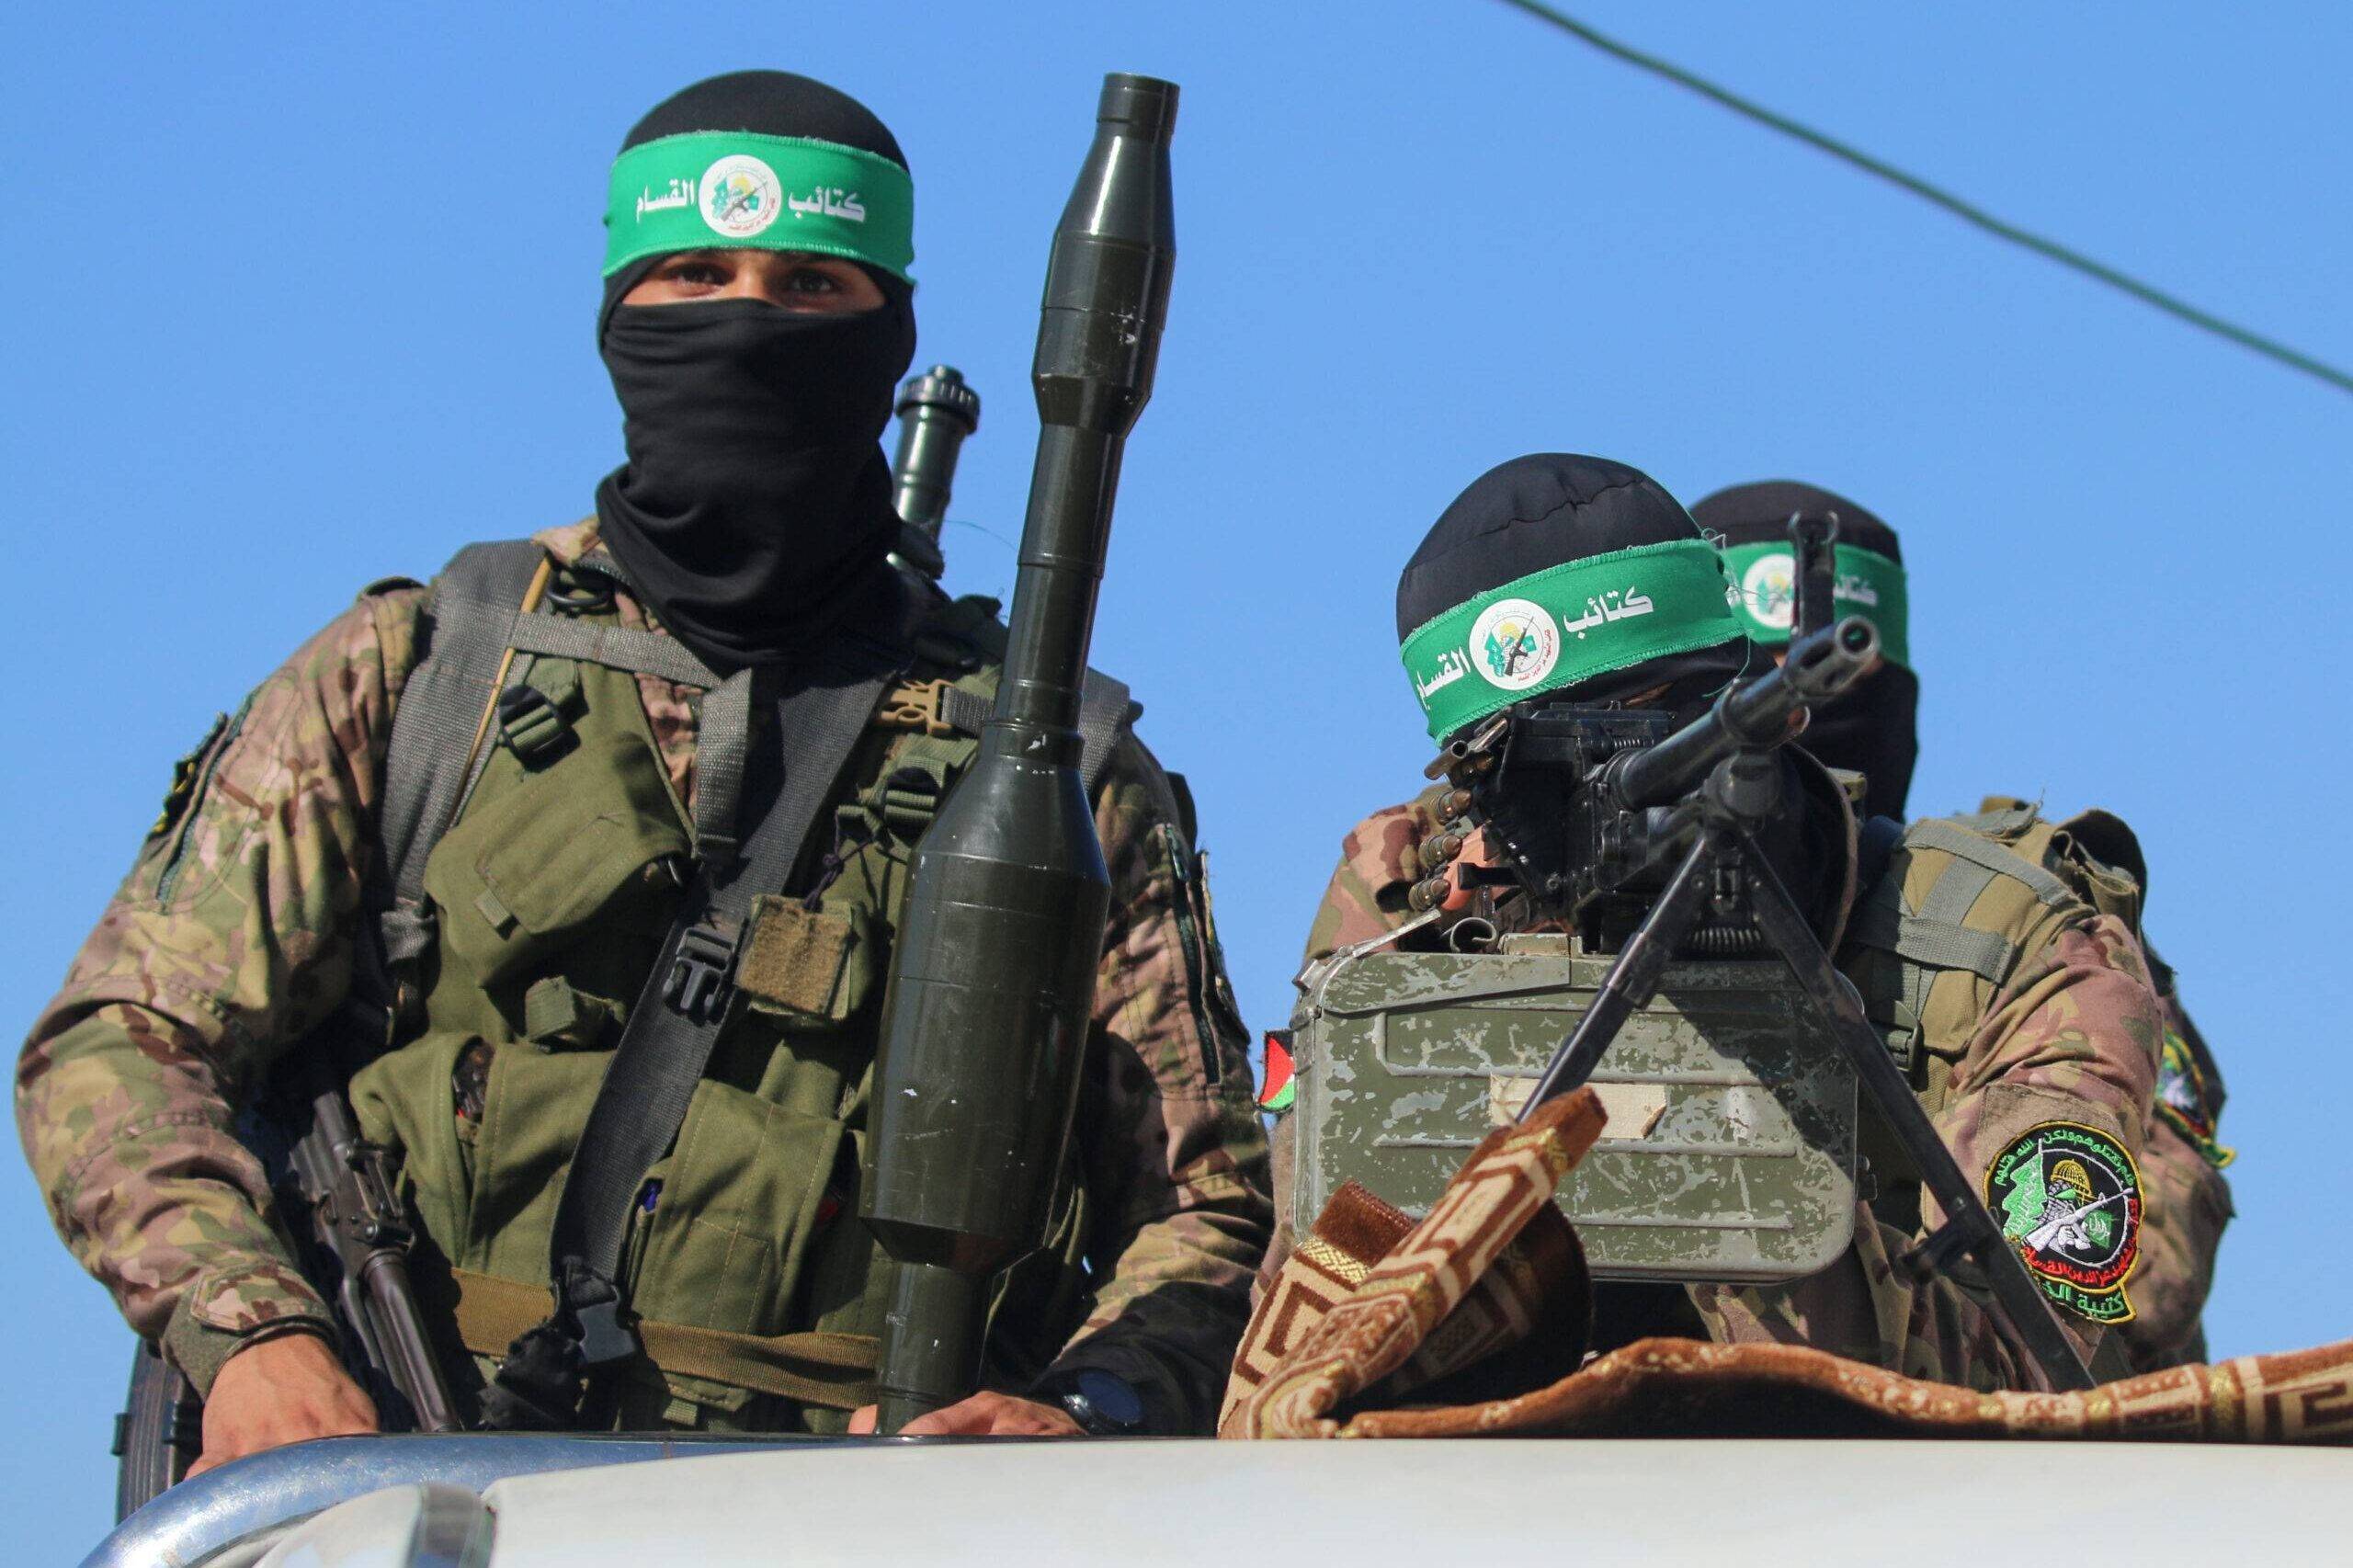 Fighters of the Izz al-Din al-Qassam Brigades, the military wing of Hamas, display their combat weapons in Maghazi camp July 19, 2023 [Ahmed Hasaballah/Getty Images]